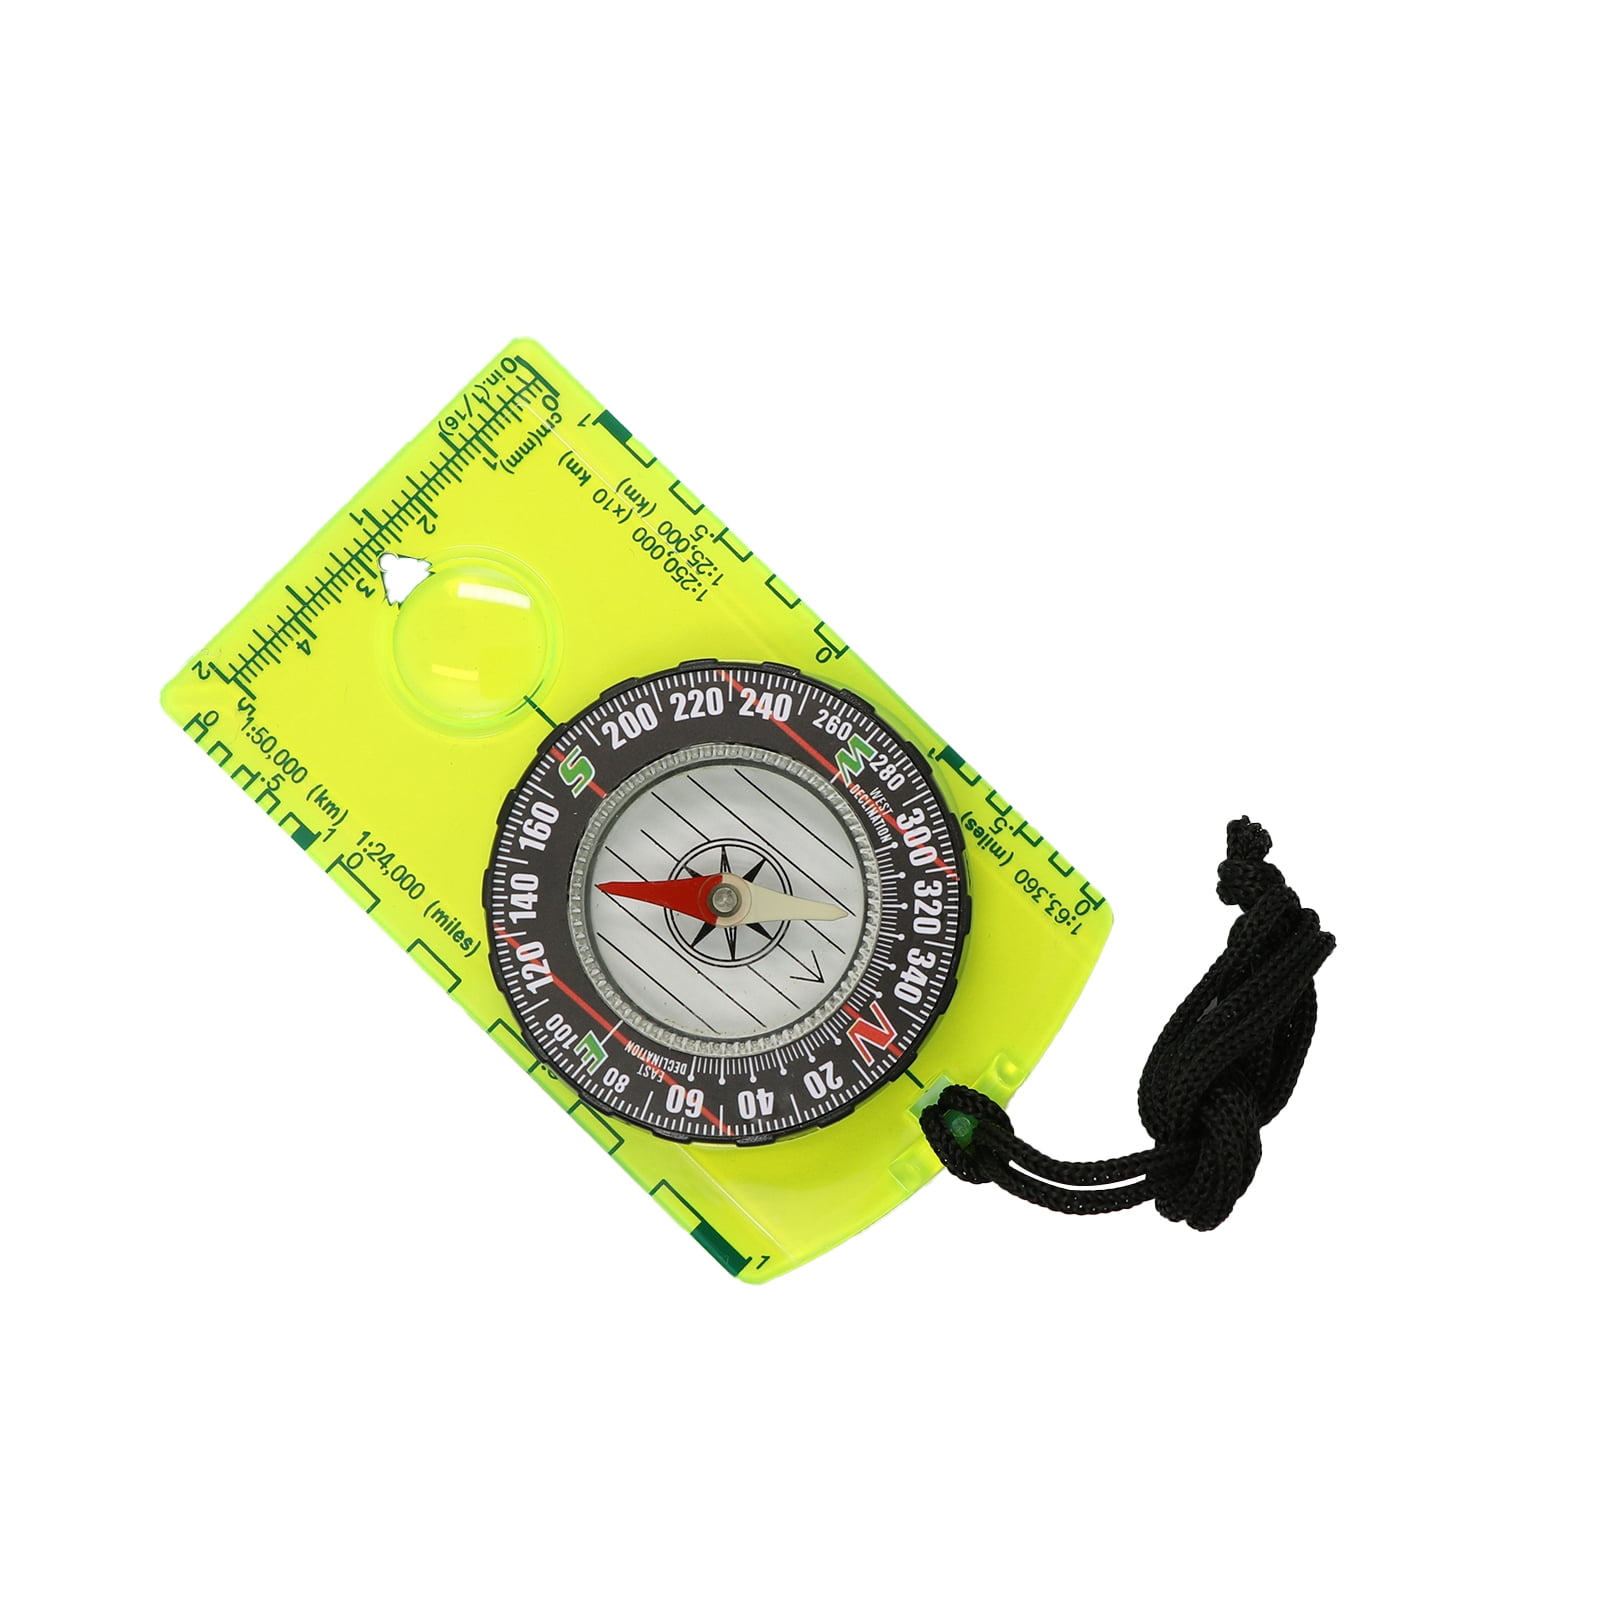 Outdoor Portable Thumb Compass with Map Scale for Orienteering Hiking School Use 